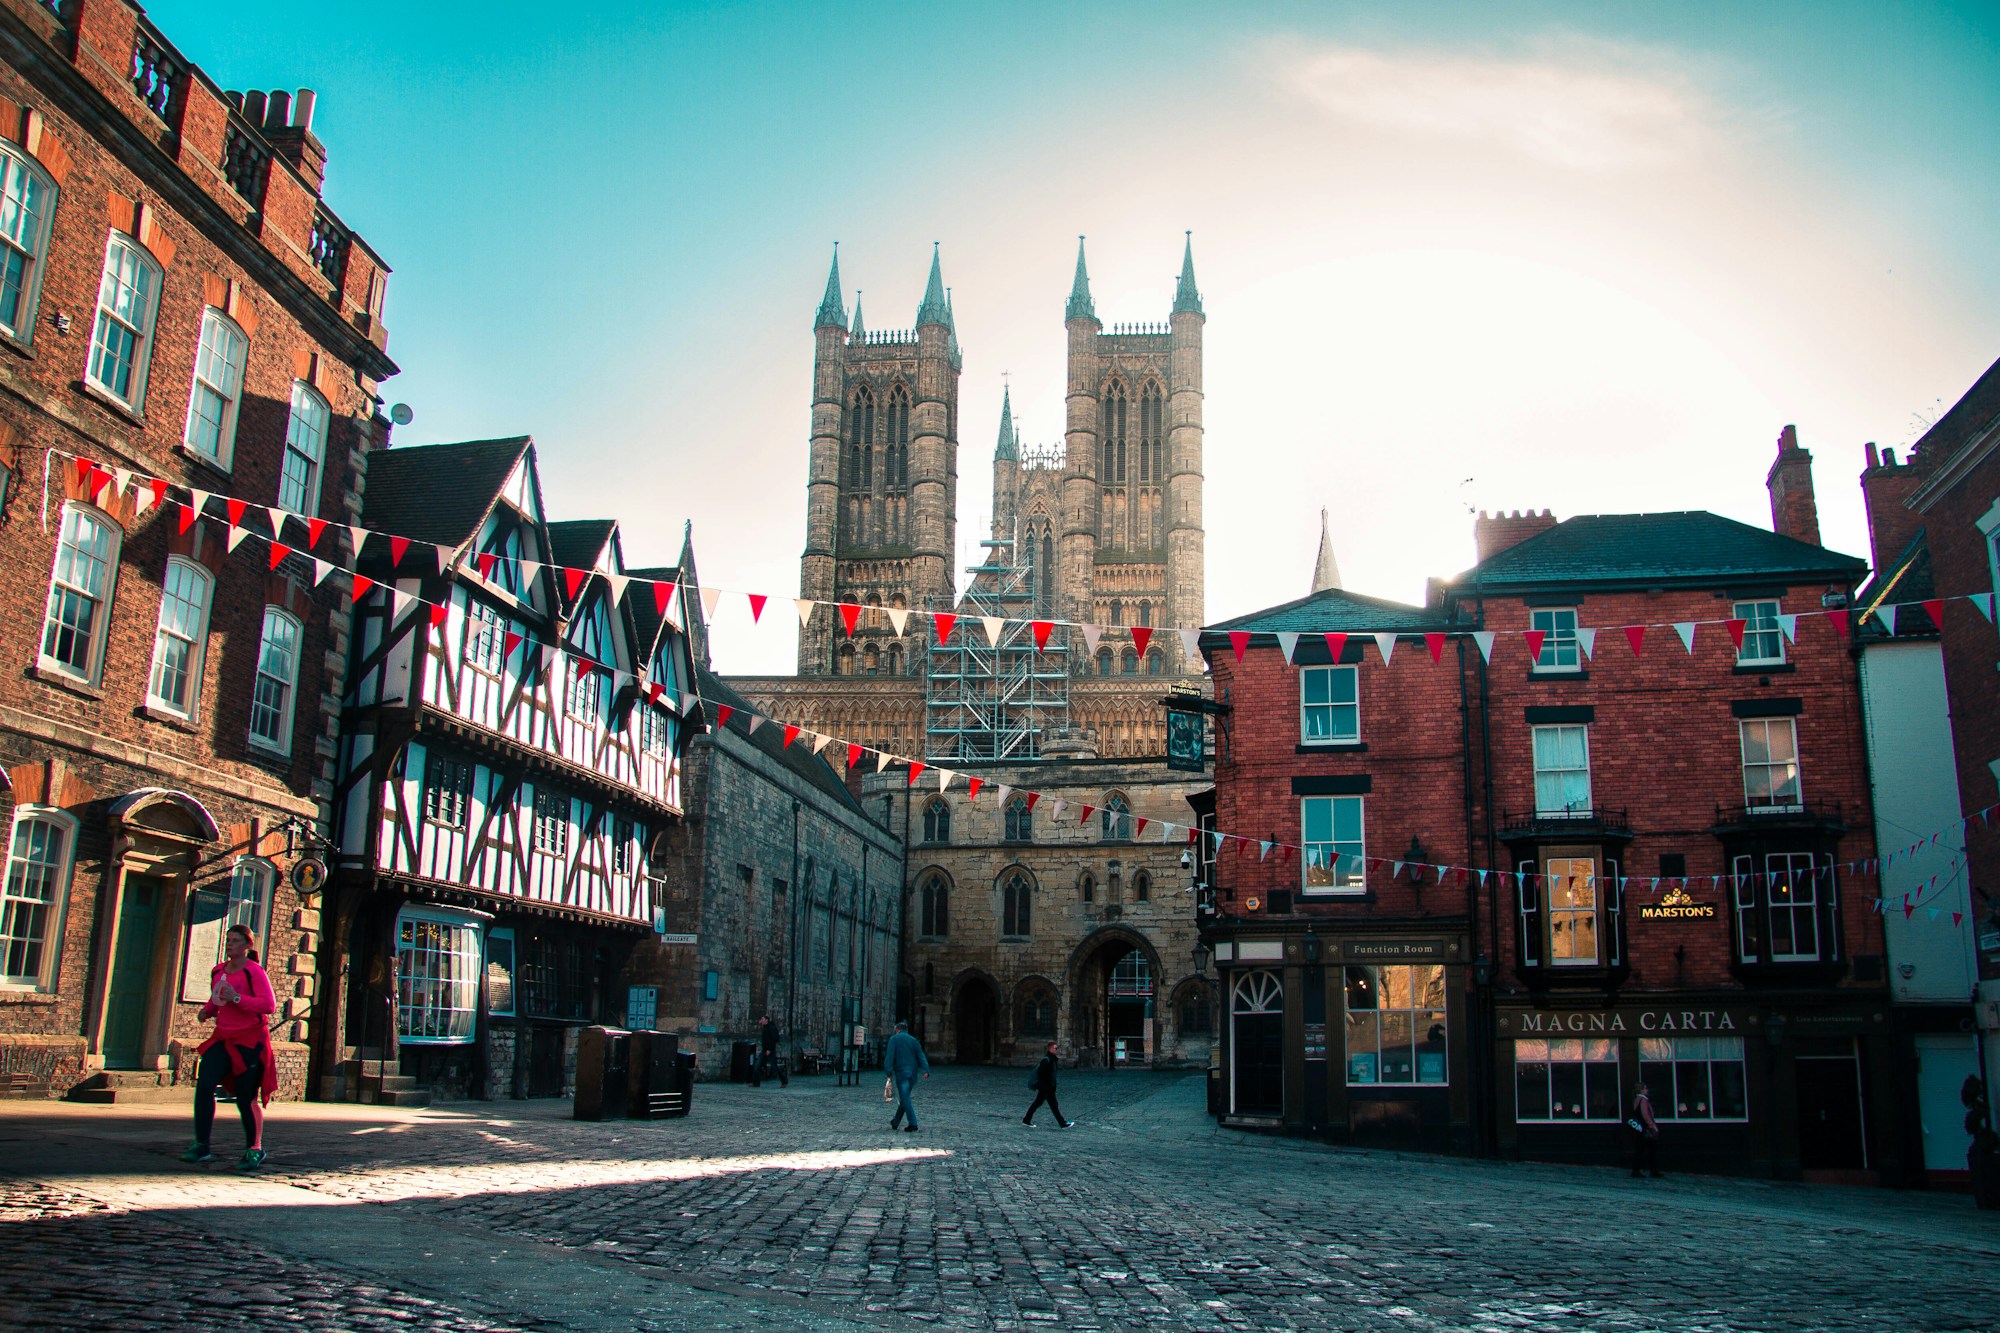 What to see in Lincoln: A Traveler's Guide